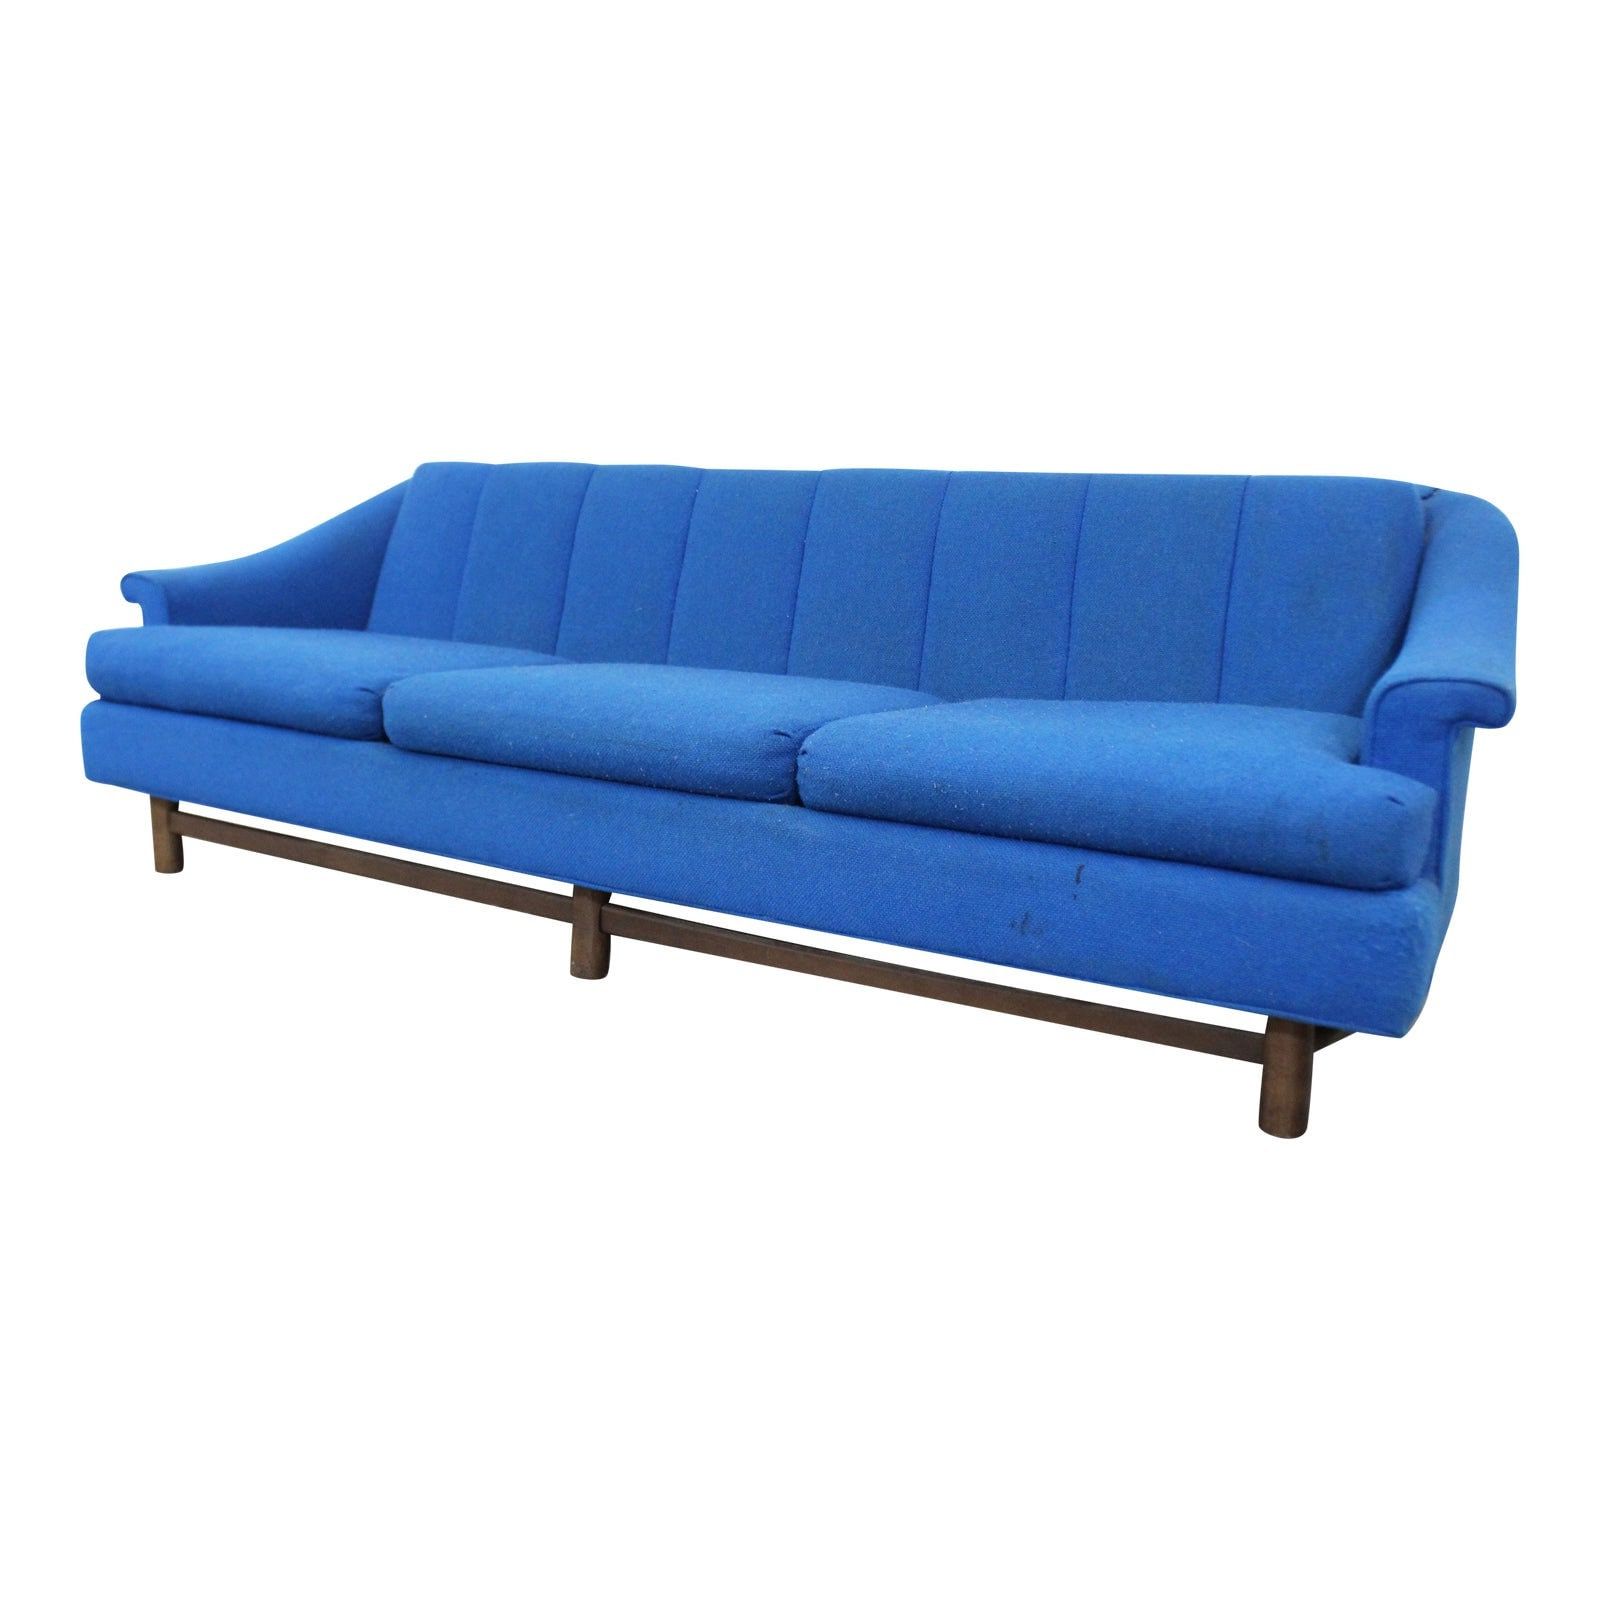 Mid Century Modern Blue 3 Seater Sofa On Wood Base, Danish Modern Couch Intended For Mid Century 3 Seat Couches (Gallery 1 of 20)